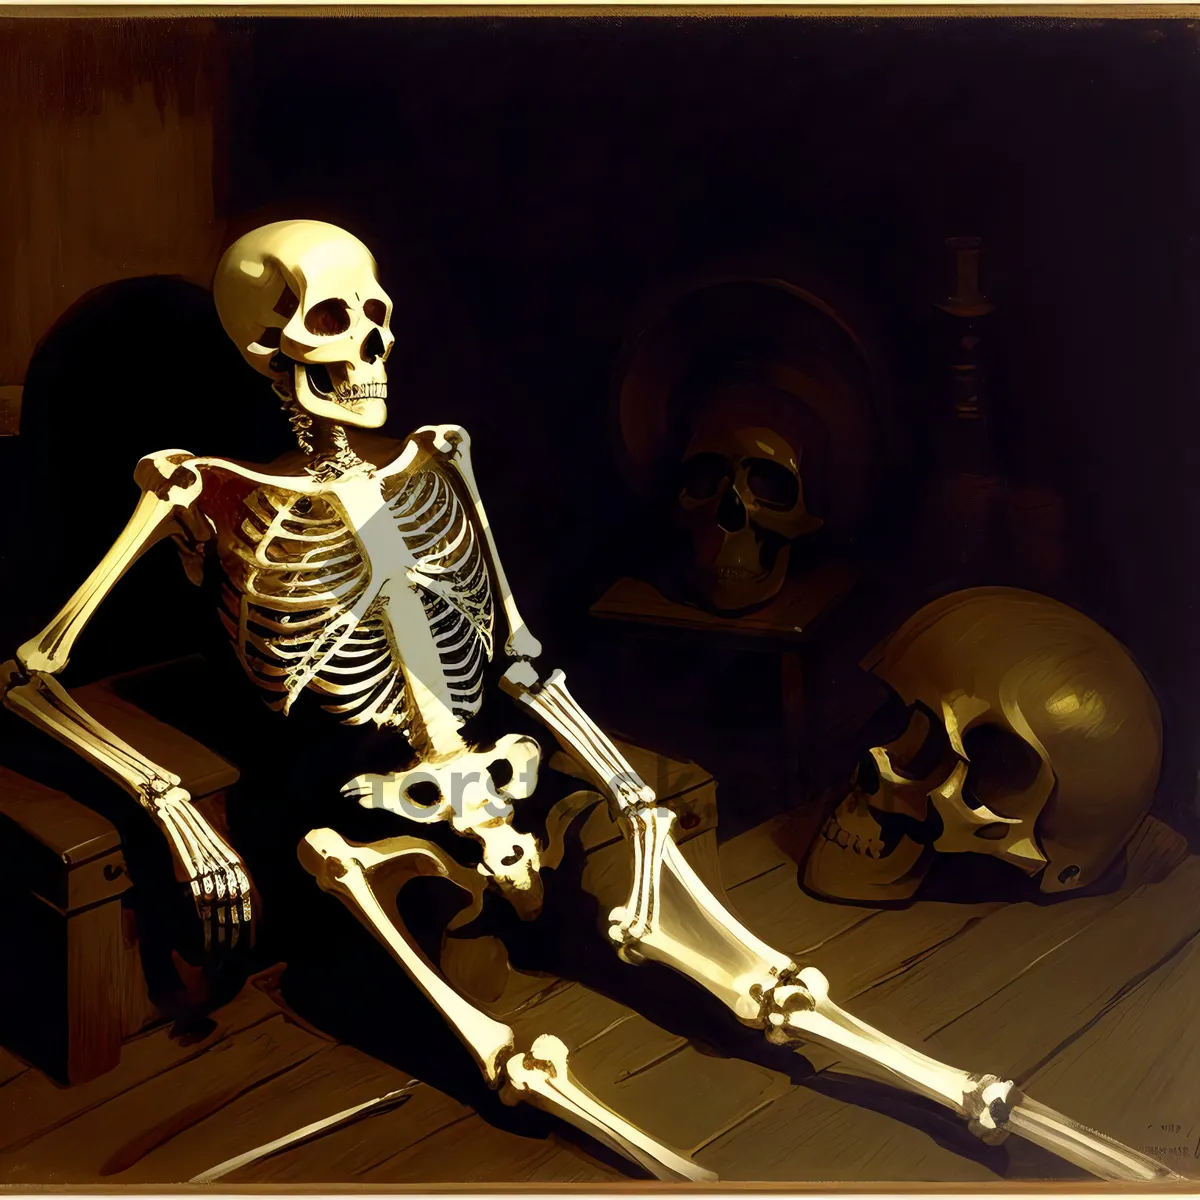 Picture of Spooky Skeleton Playing Trombone in Haunted Atmosphere